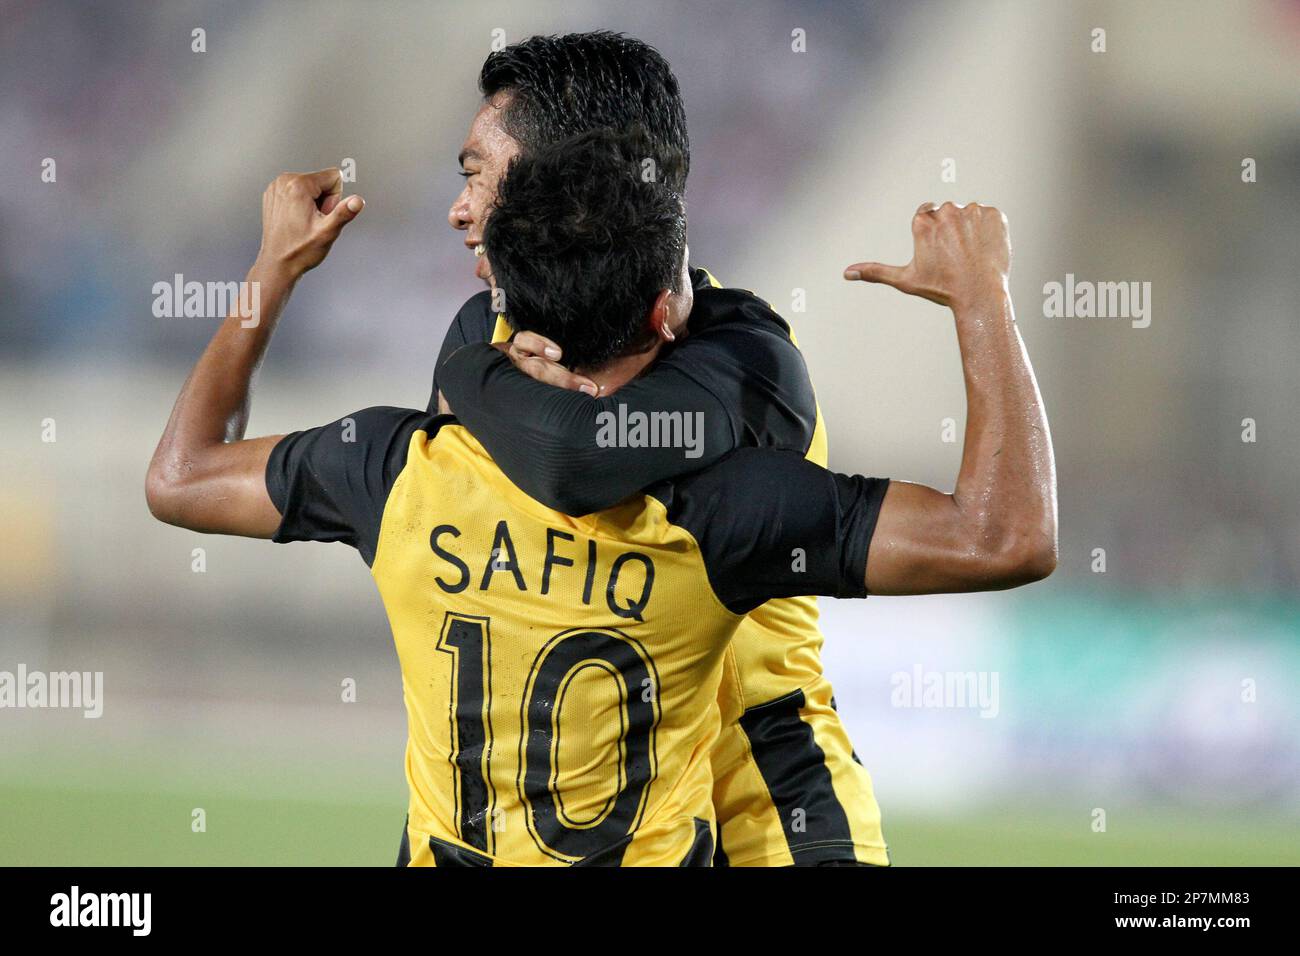 Rahim Safiq of Malaysia, celebrates after scoring the third goal, while his  team mate Muslim Mohamad Azmi, right, hugs him on during the semi-final  soccer match between Malaysia and Laos at the